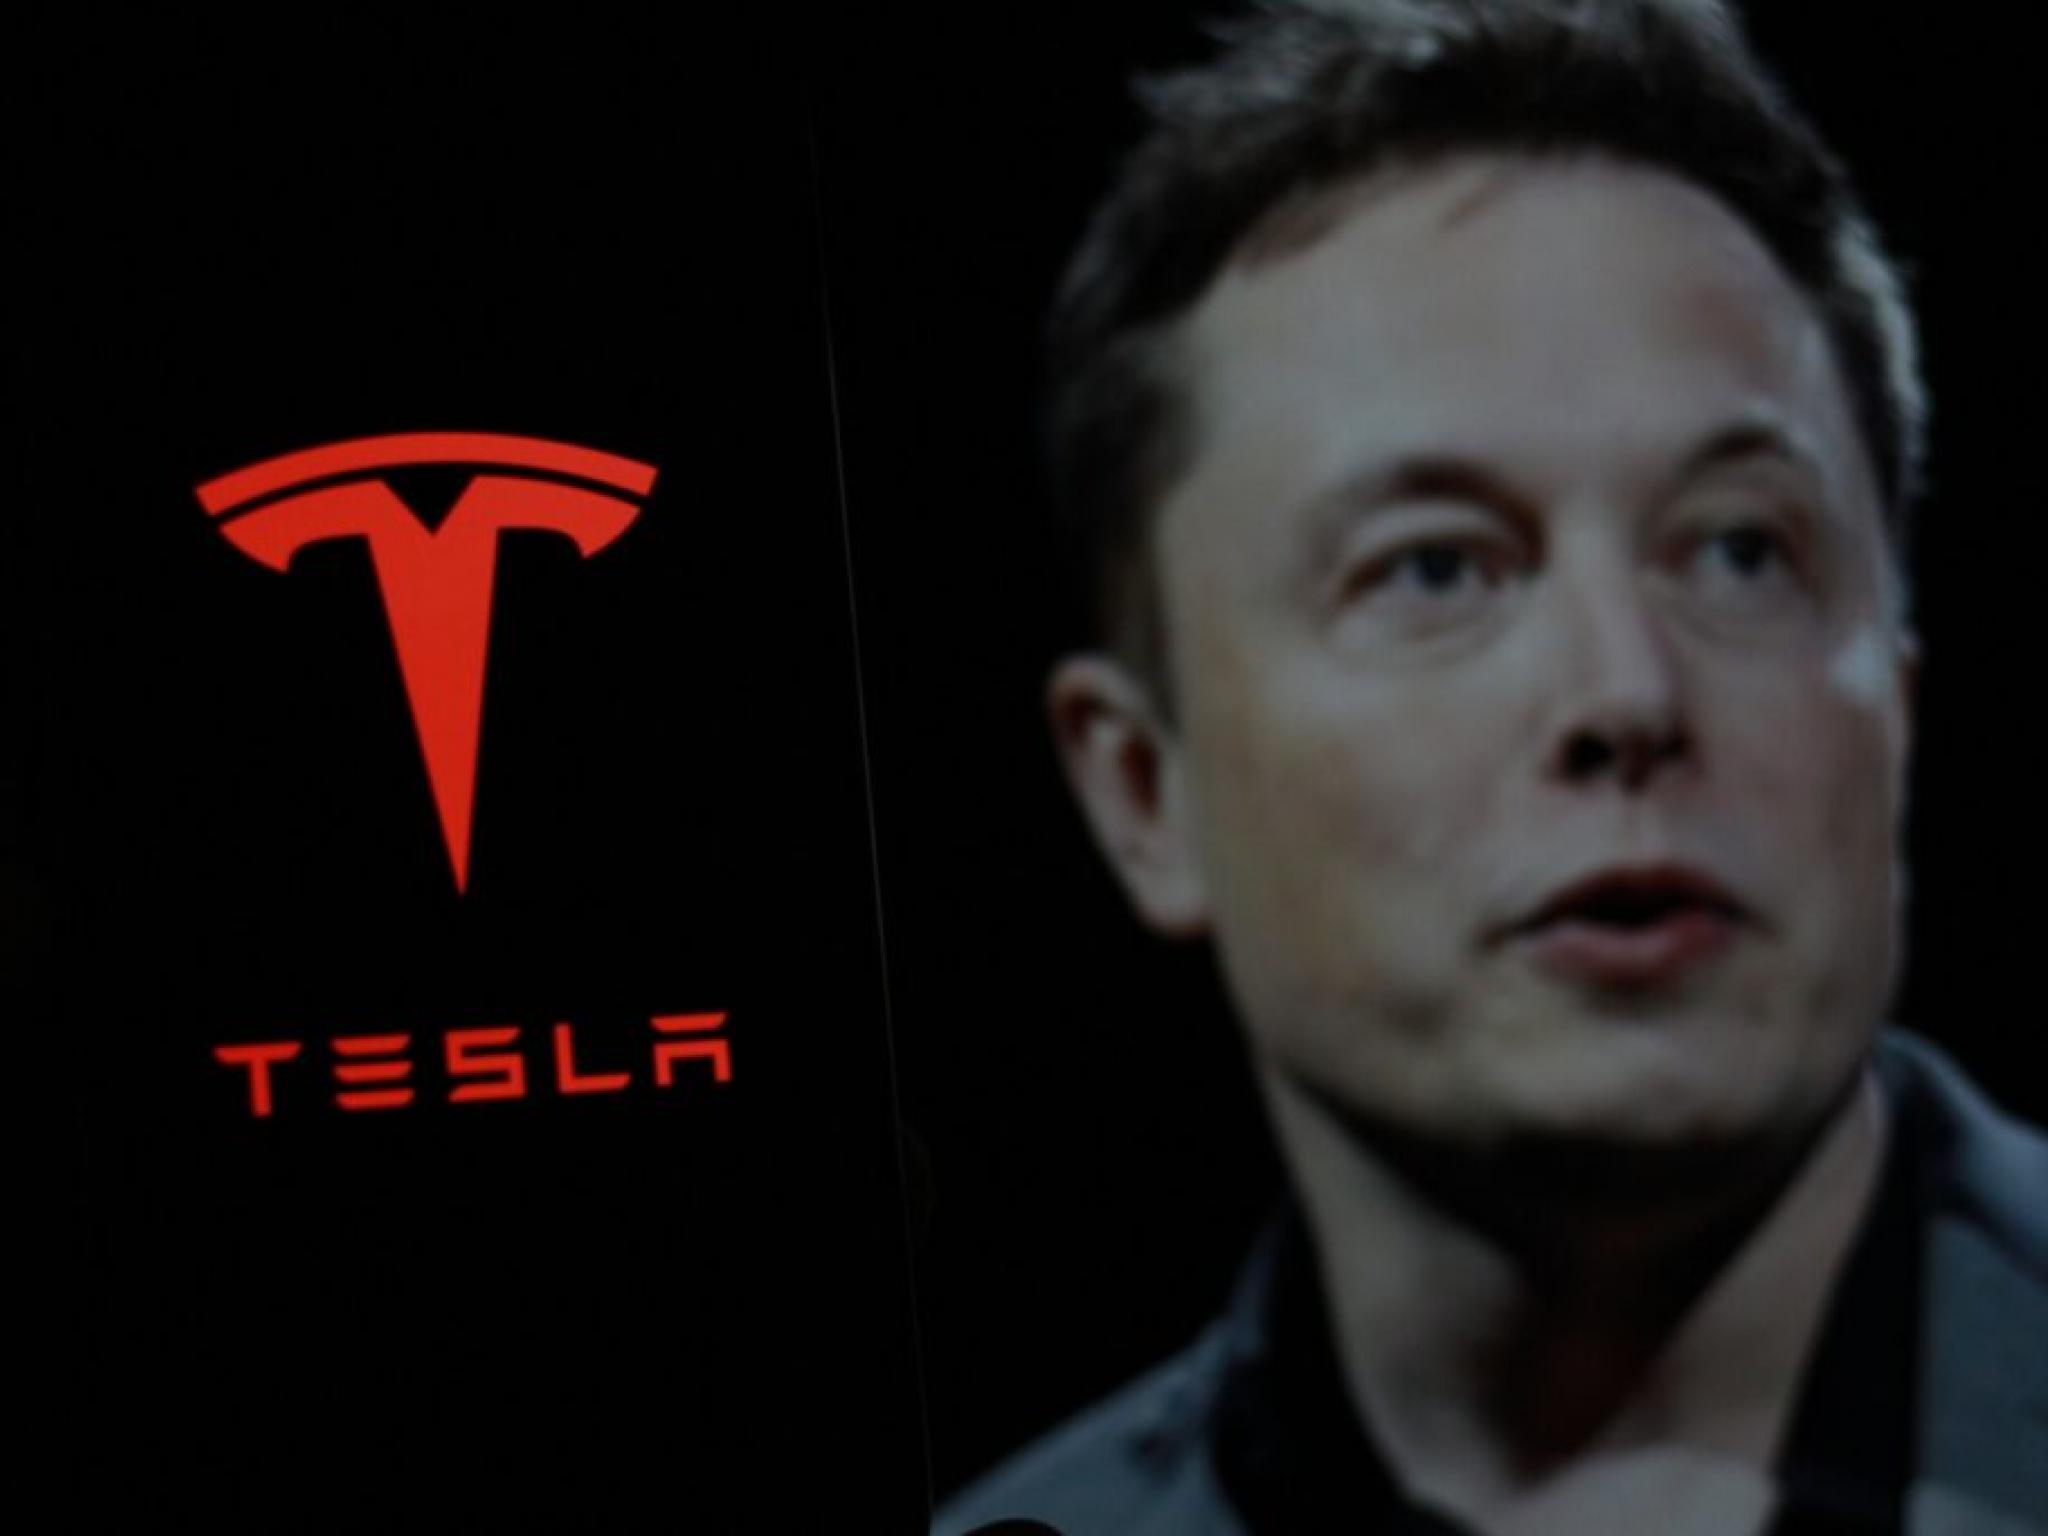  tesla-boards-credibility-at-stake-with-56b-elon-musk-pay-package-vote-says-ross-gerber-super-grateful-for-tesla-as-an-investment 